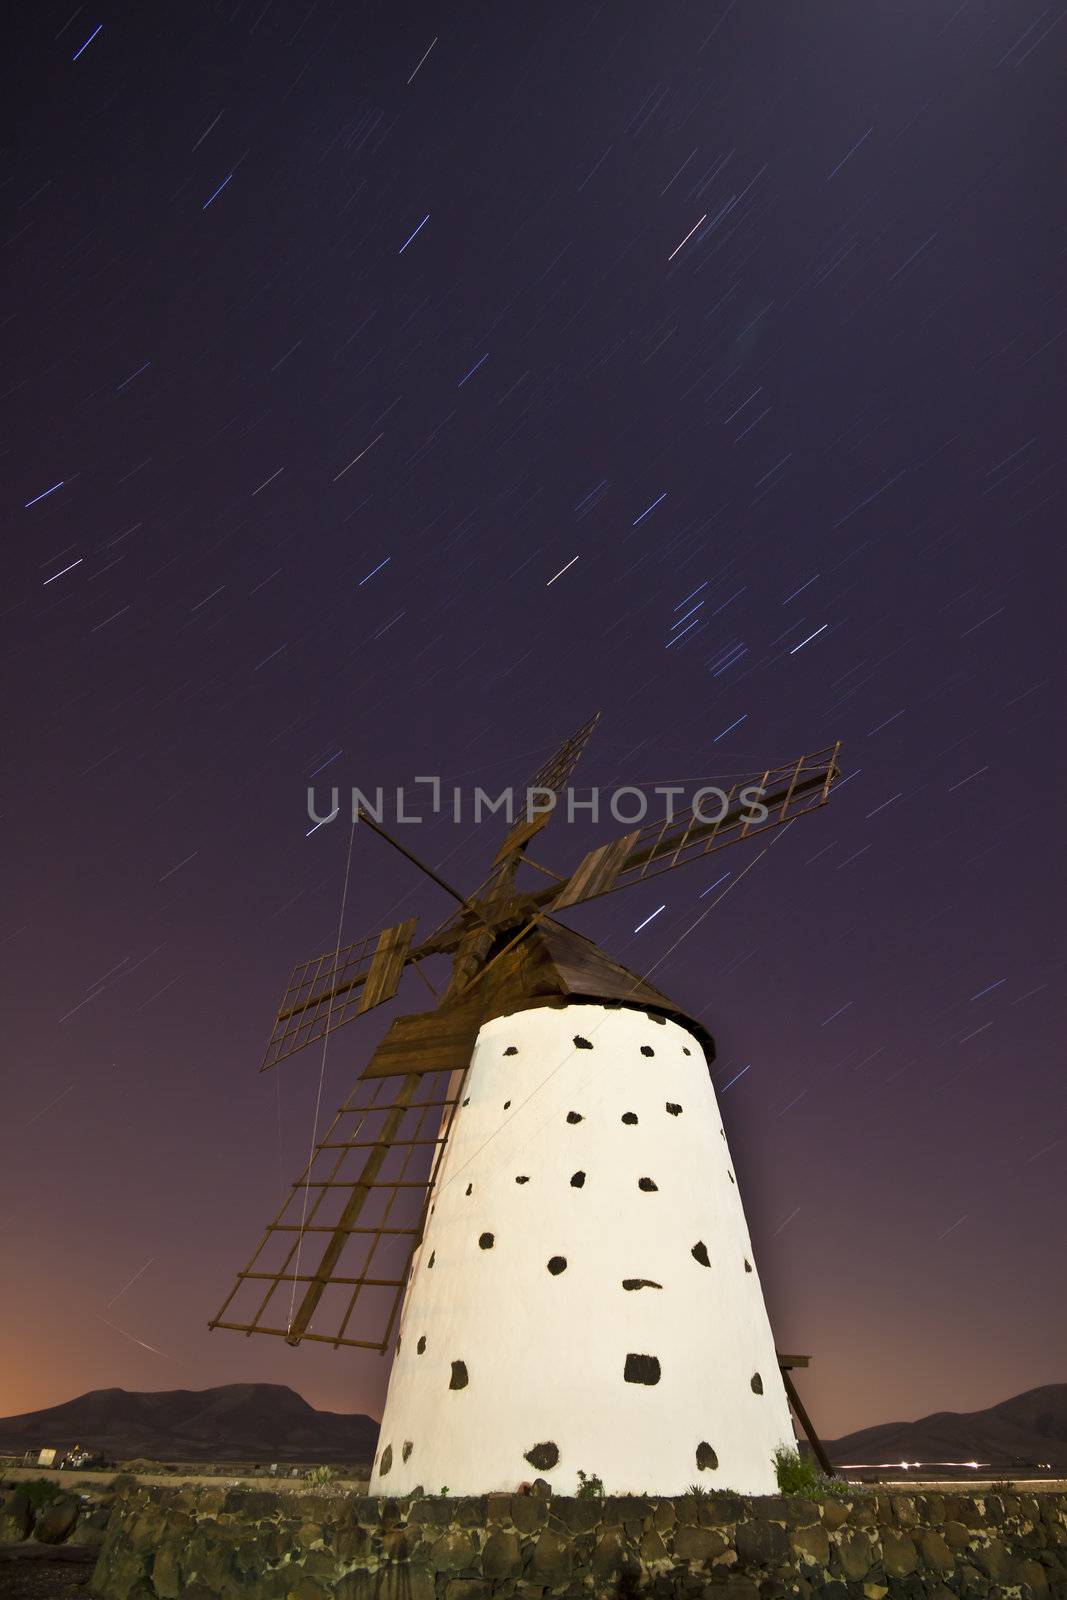 Night shot of a traditional windmill at the Fuertaventura, Canary Islands